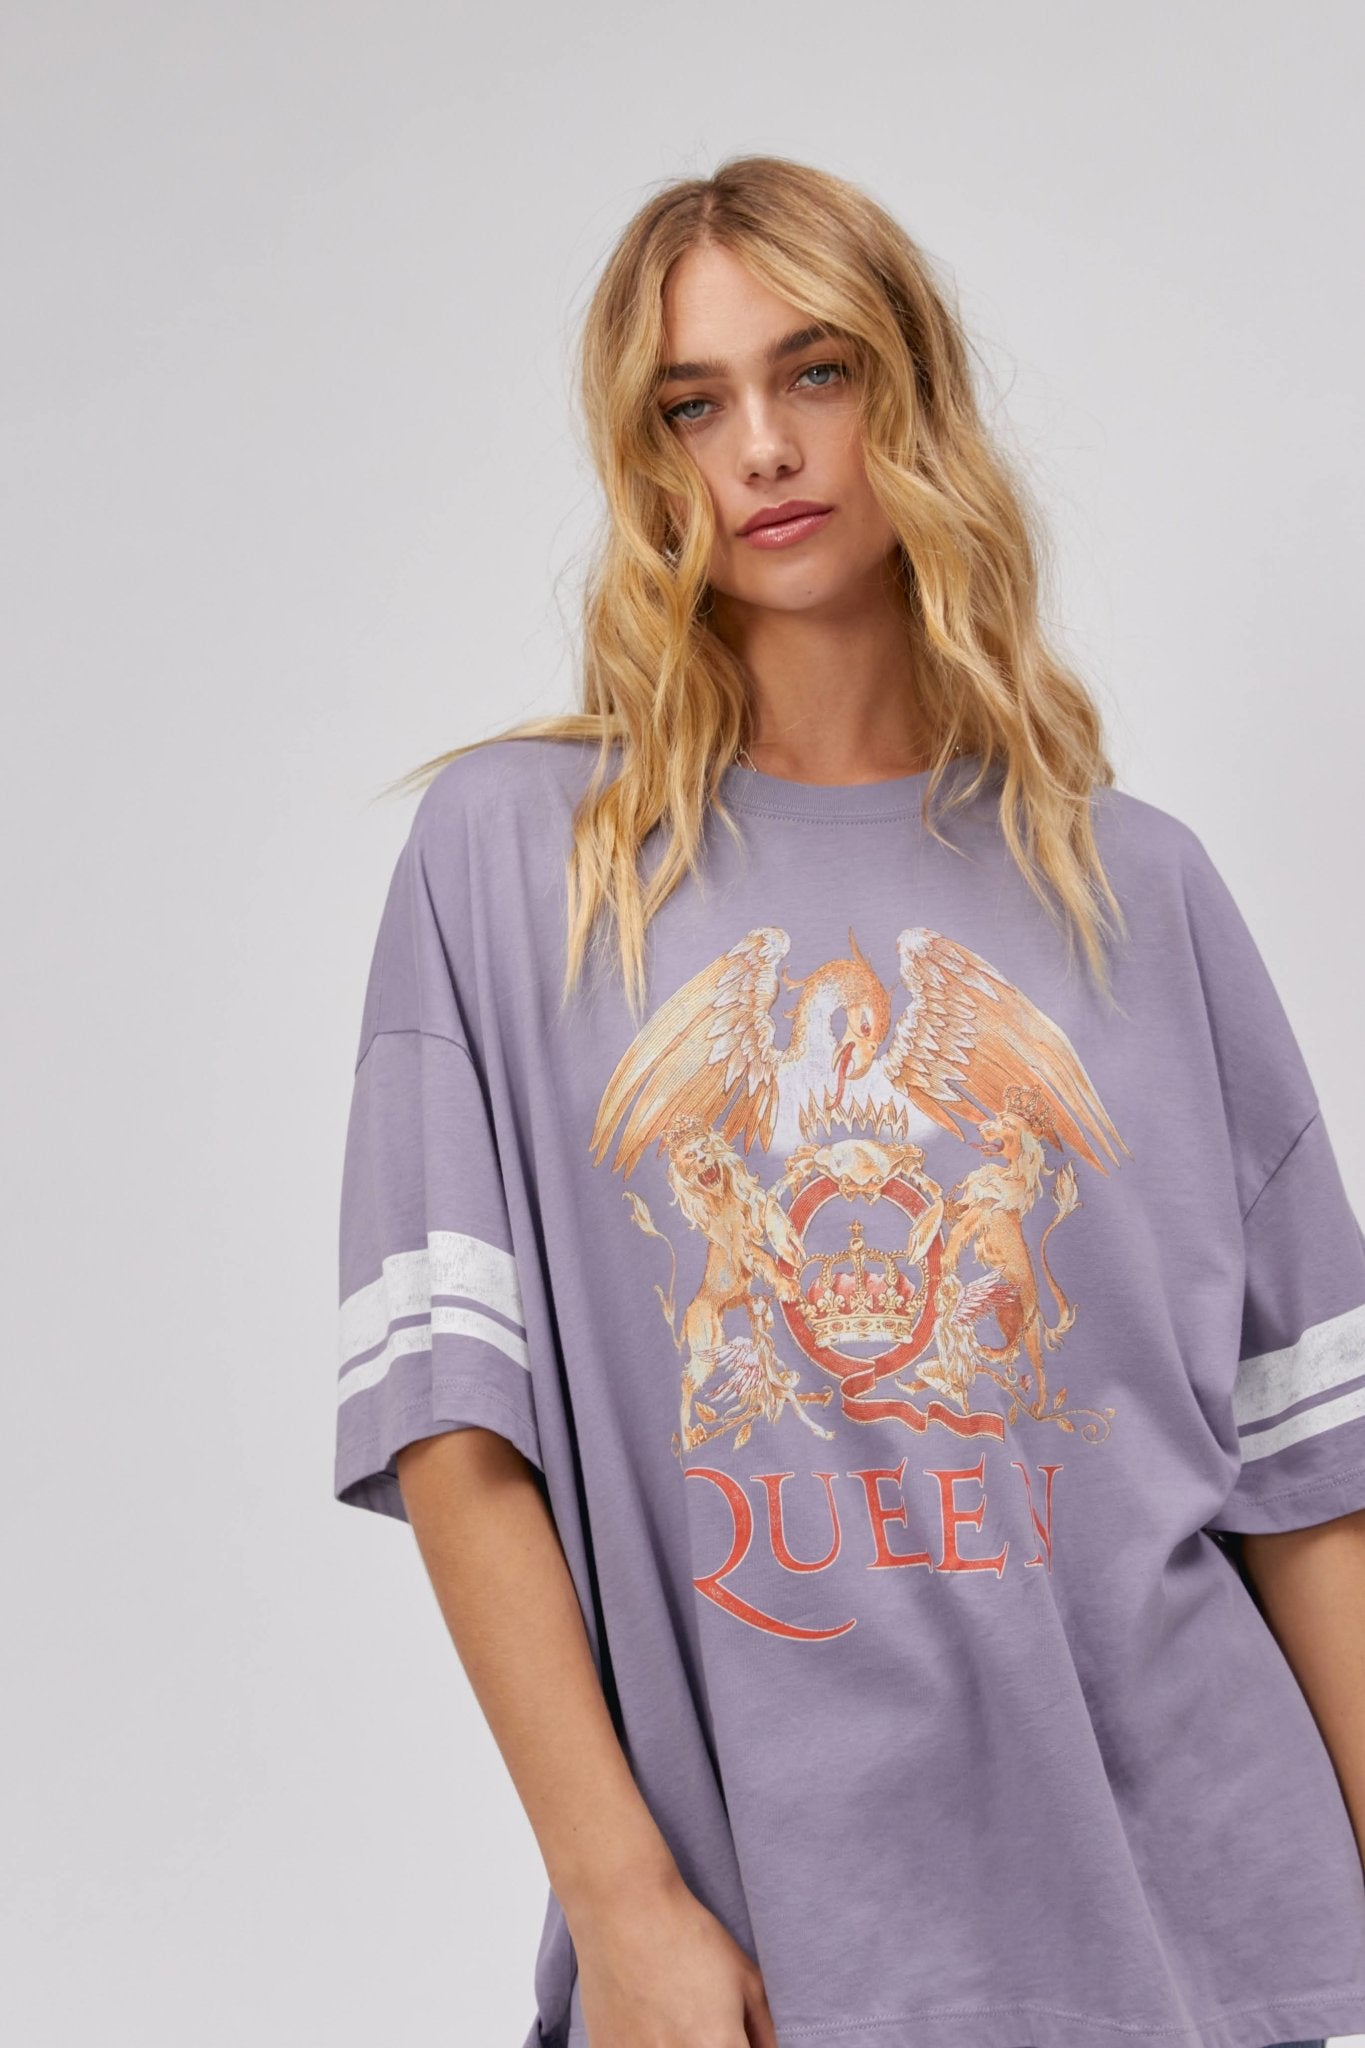 Daydreamer LA | Queen Varsity College Crest Tee | Hazy Violet - Women's Shirts & Tops - Blooming Daily